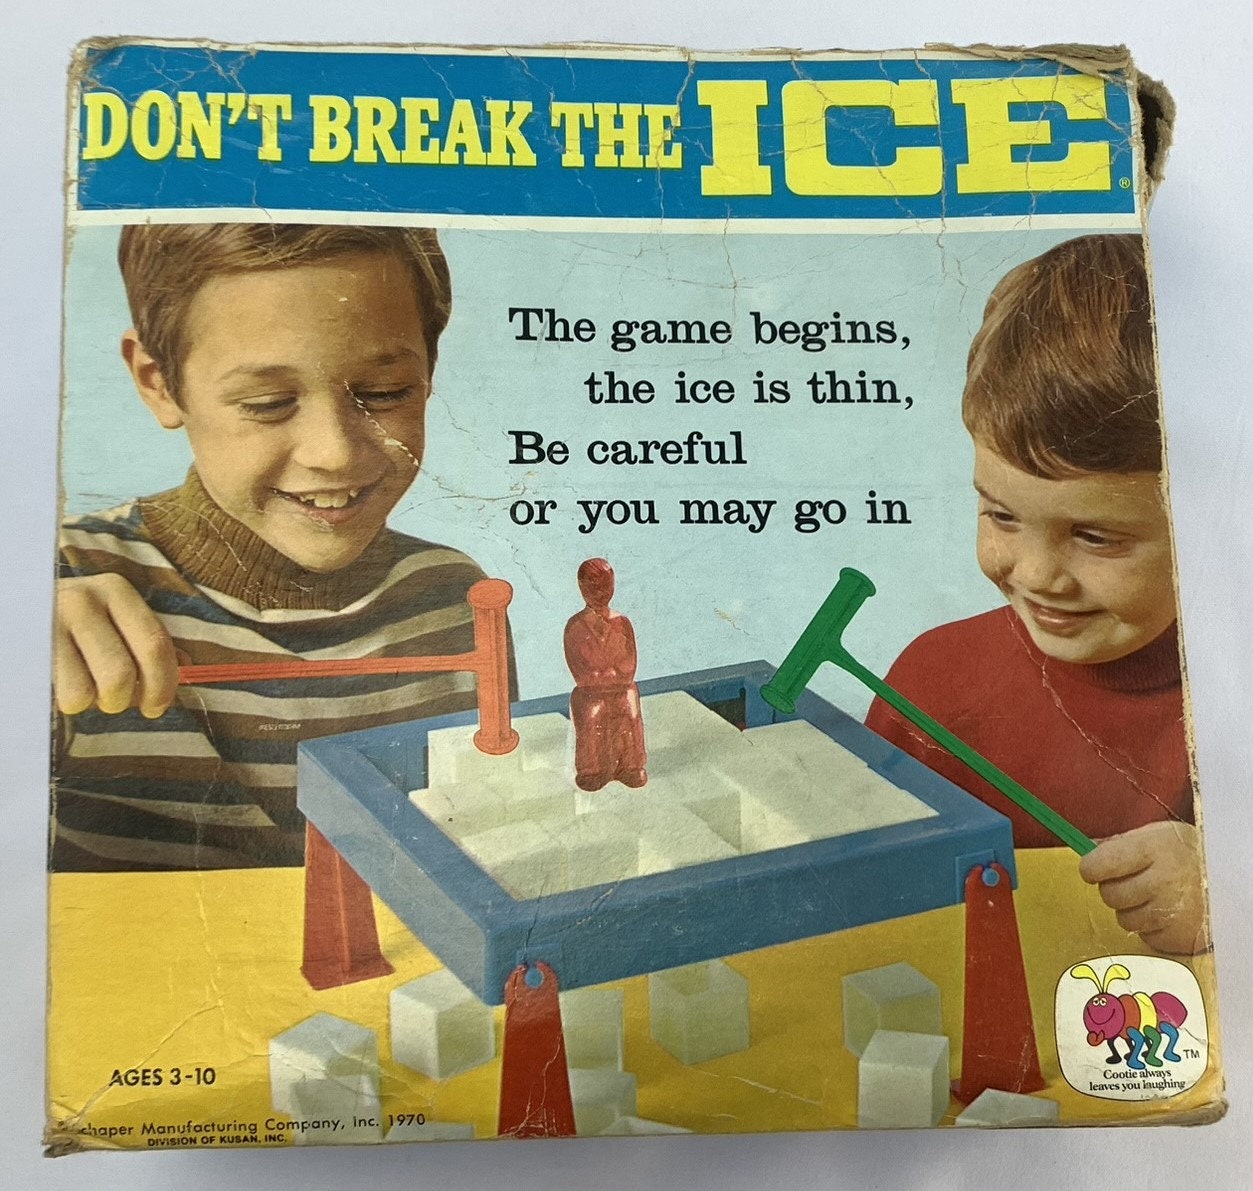 1969 Don't Break the Ice Game by Schaper in Good Condition FREE